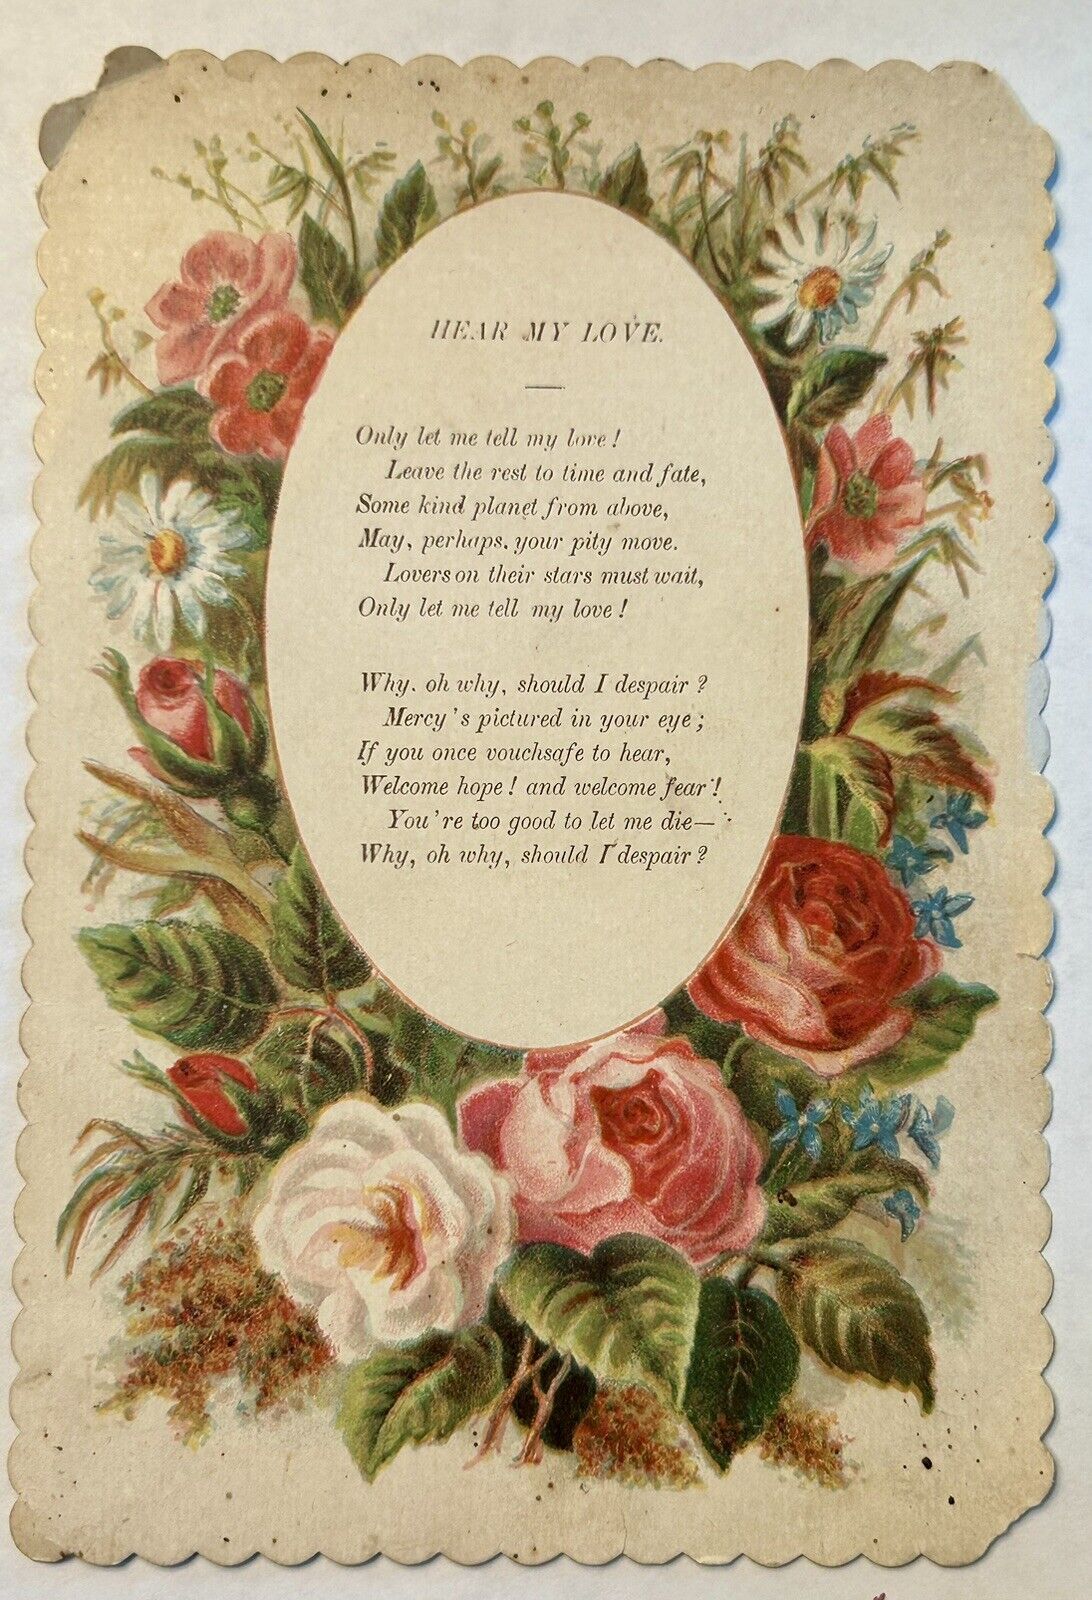 Hear My Love. Poem. Vintage postcard. Love and Romance. Early 1900s.